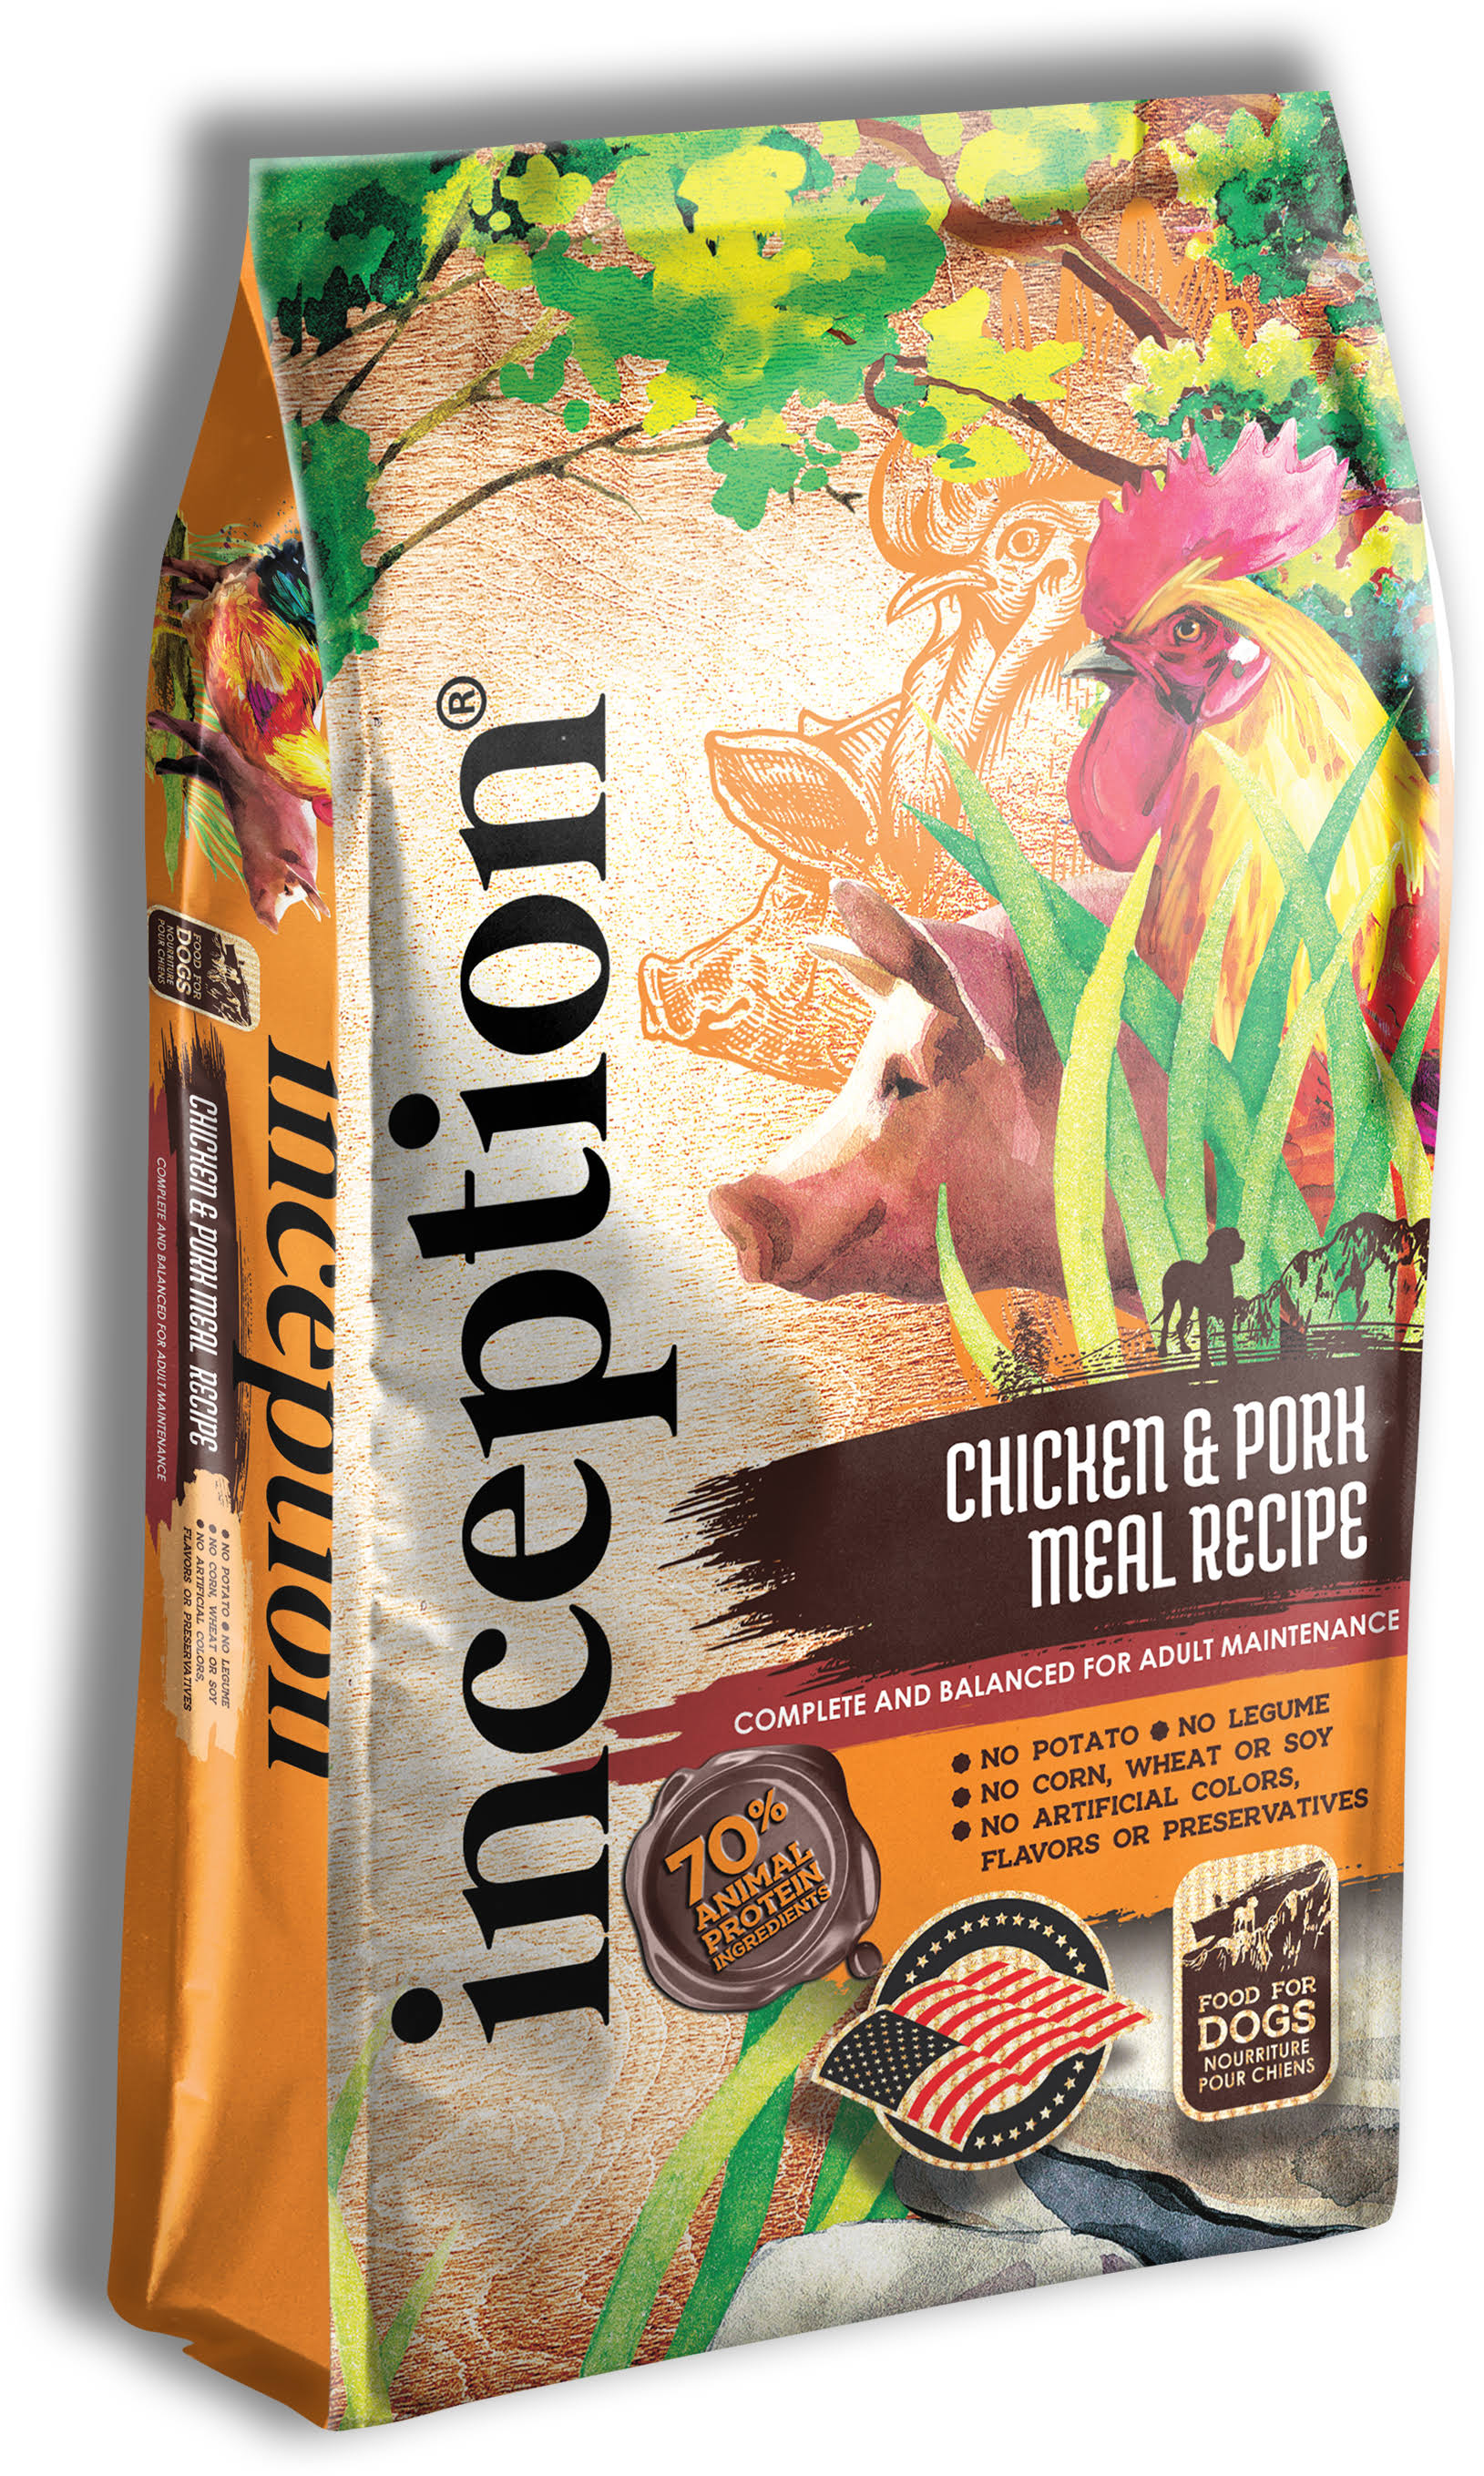 Inception Chicken & Pork Meal Recipe Dry Dog Food 13.5 lbs